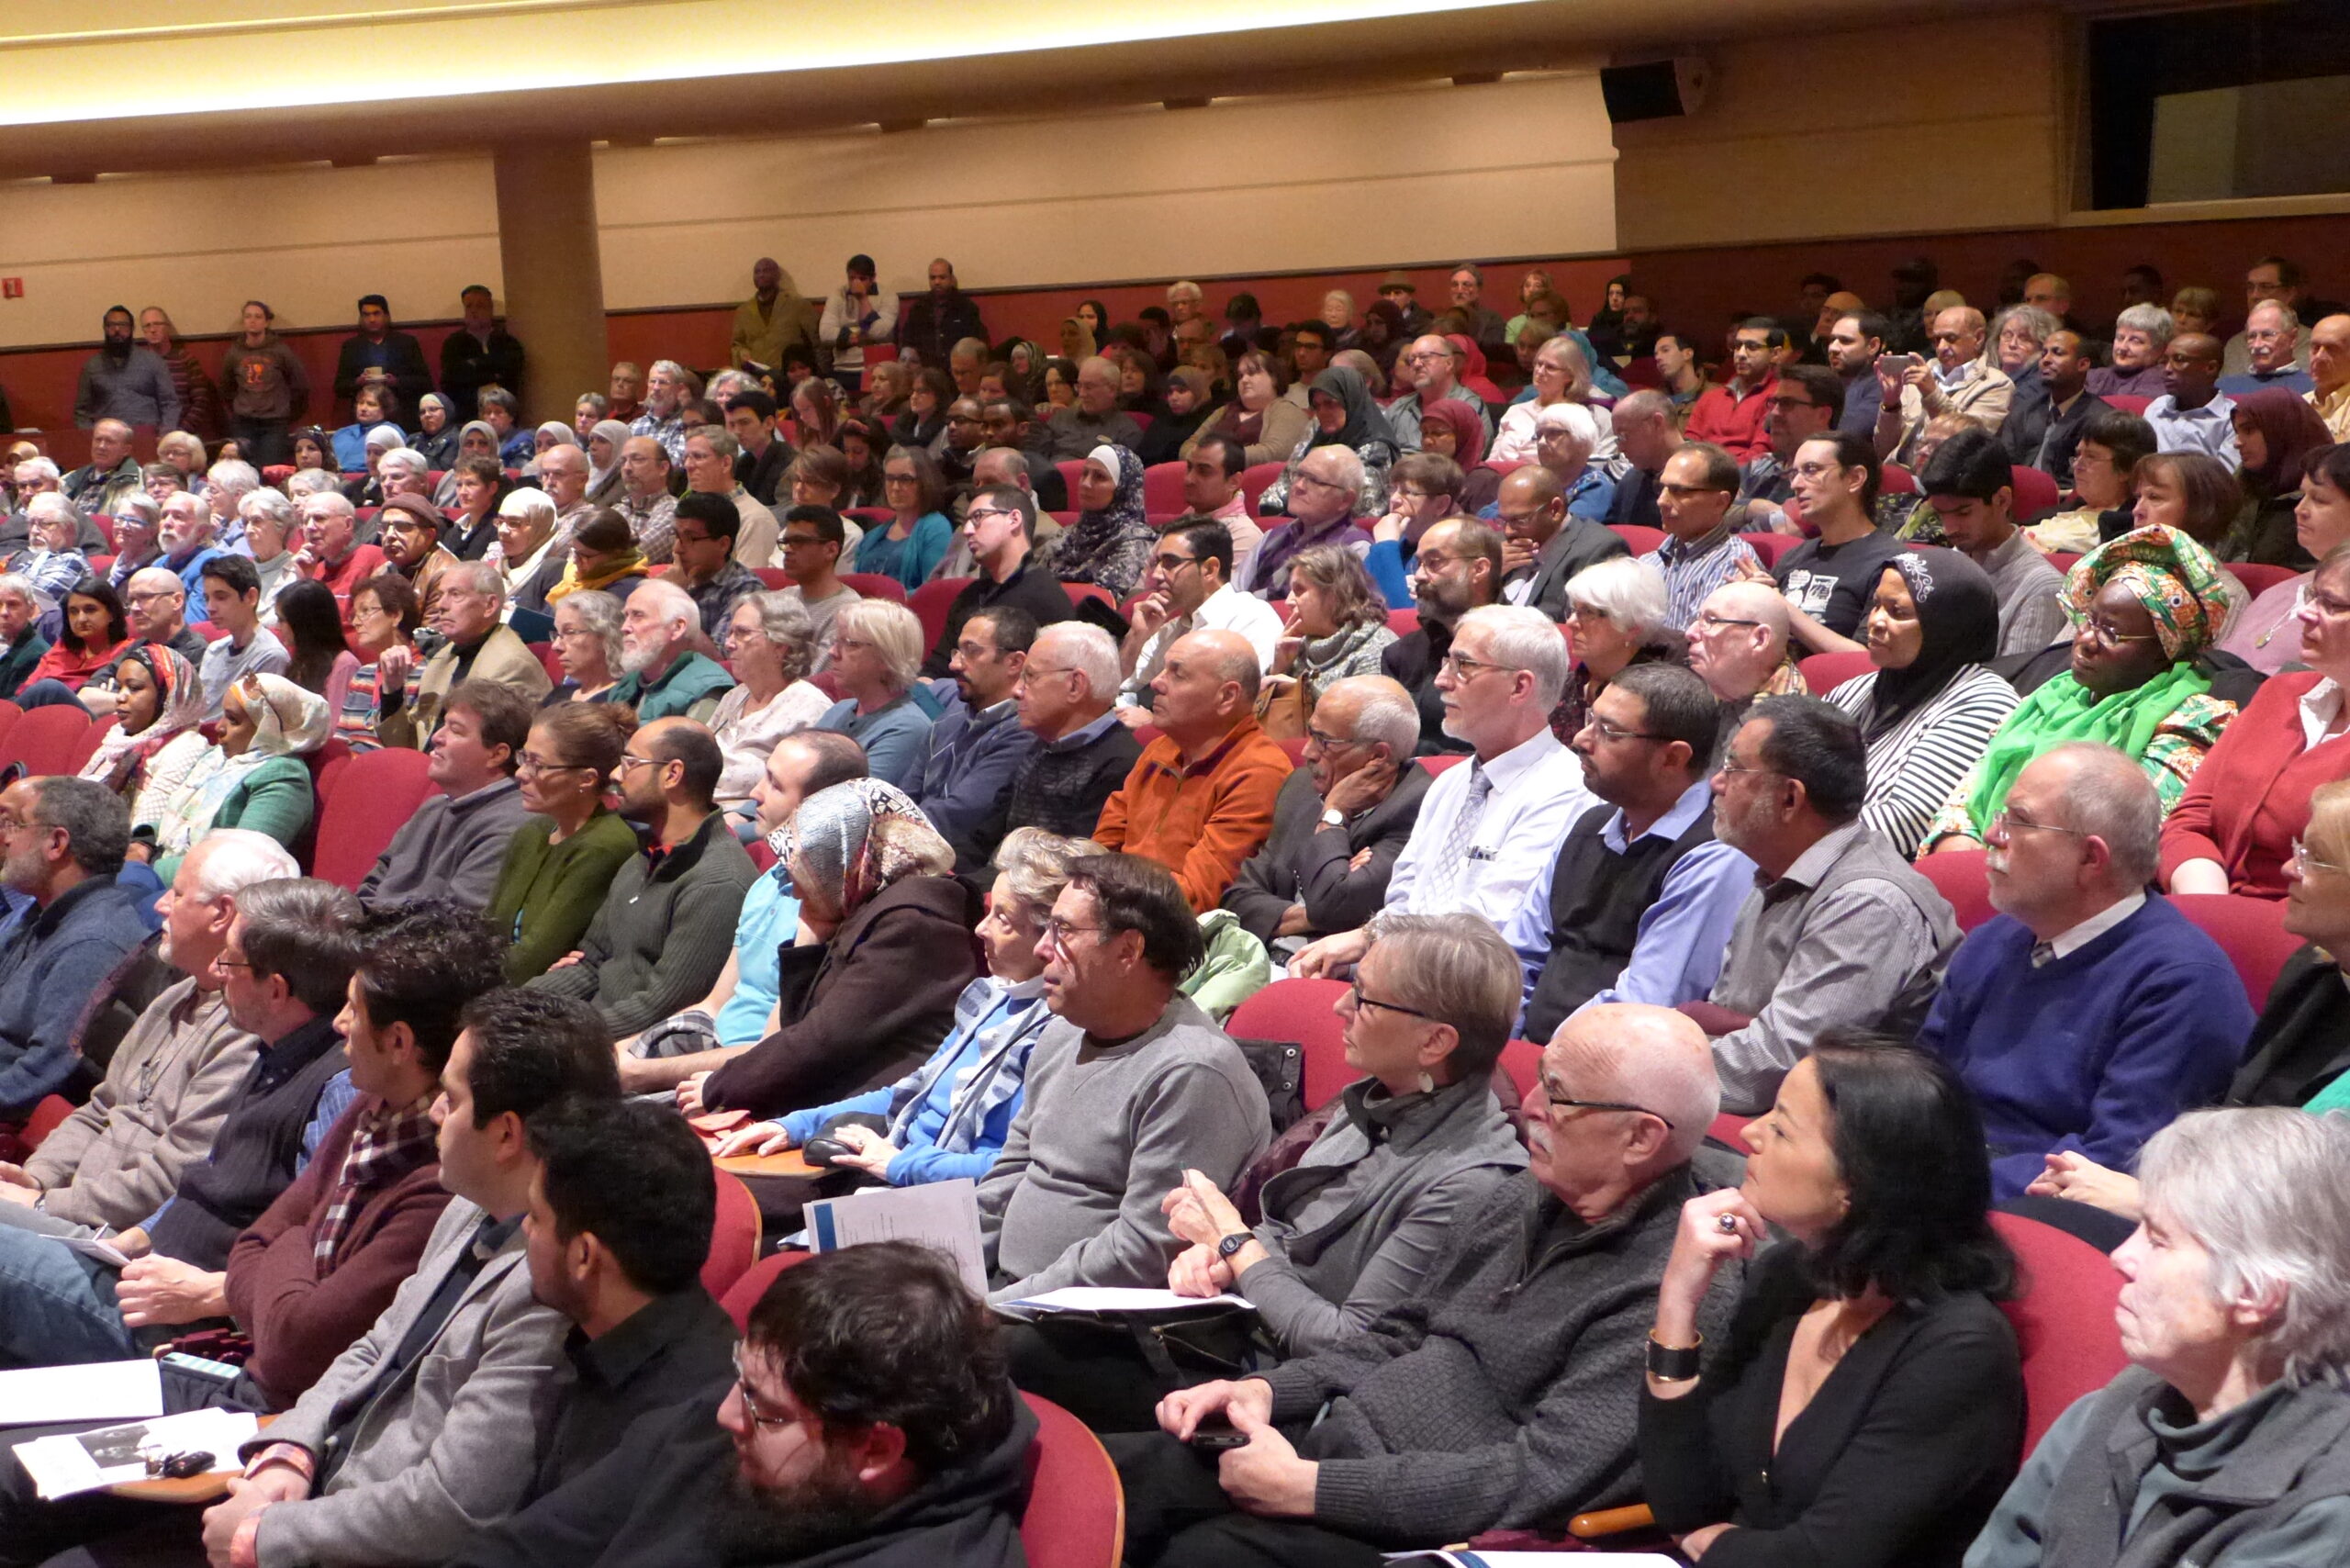 More than 500 people came to the event called "Islam, Muslims and the West: ISIL - our common enemy," on Saturday afternoon